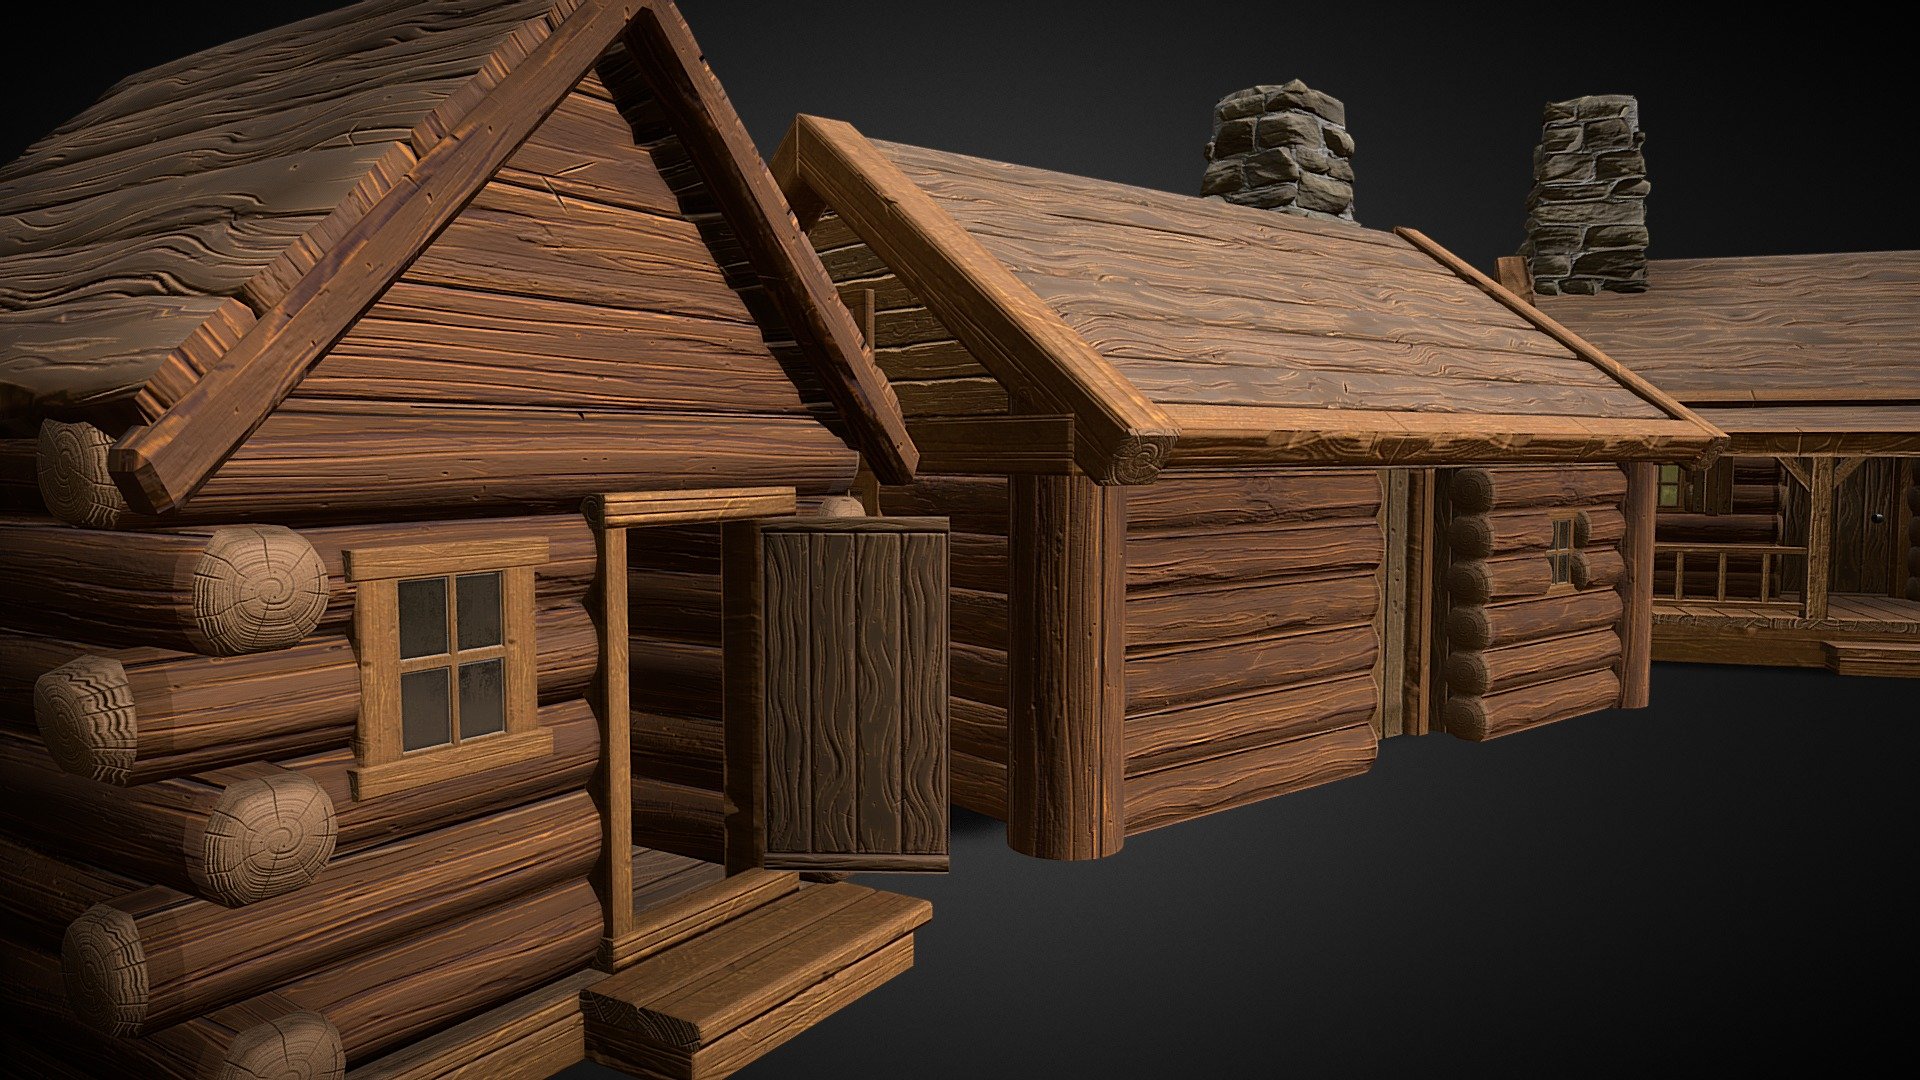 Low Poly optimized log cabins for open world games, forest scenes and more - Stylized Log Cabin Game Models [UPDATED] - Buy Royalty Free 3D model by CleanCraft3D (@CleanCraft_3D) 3d model